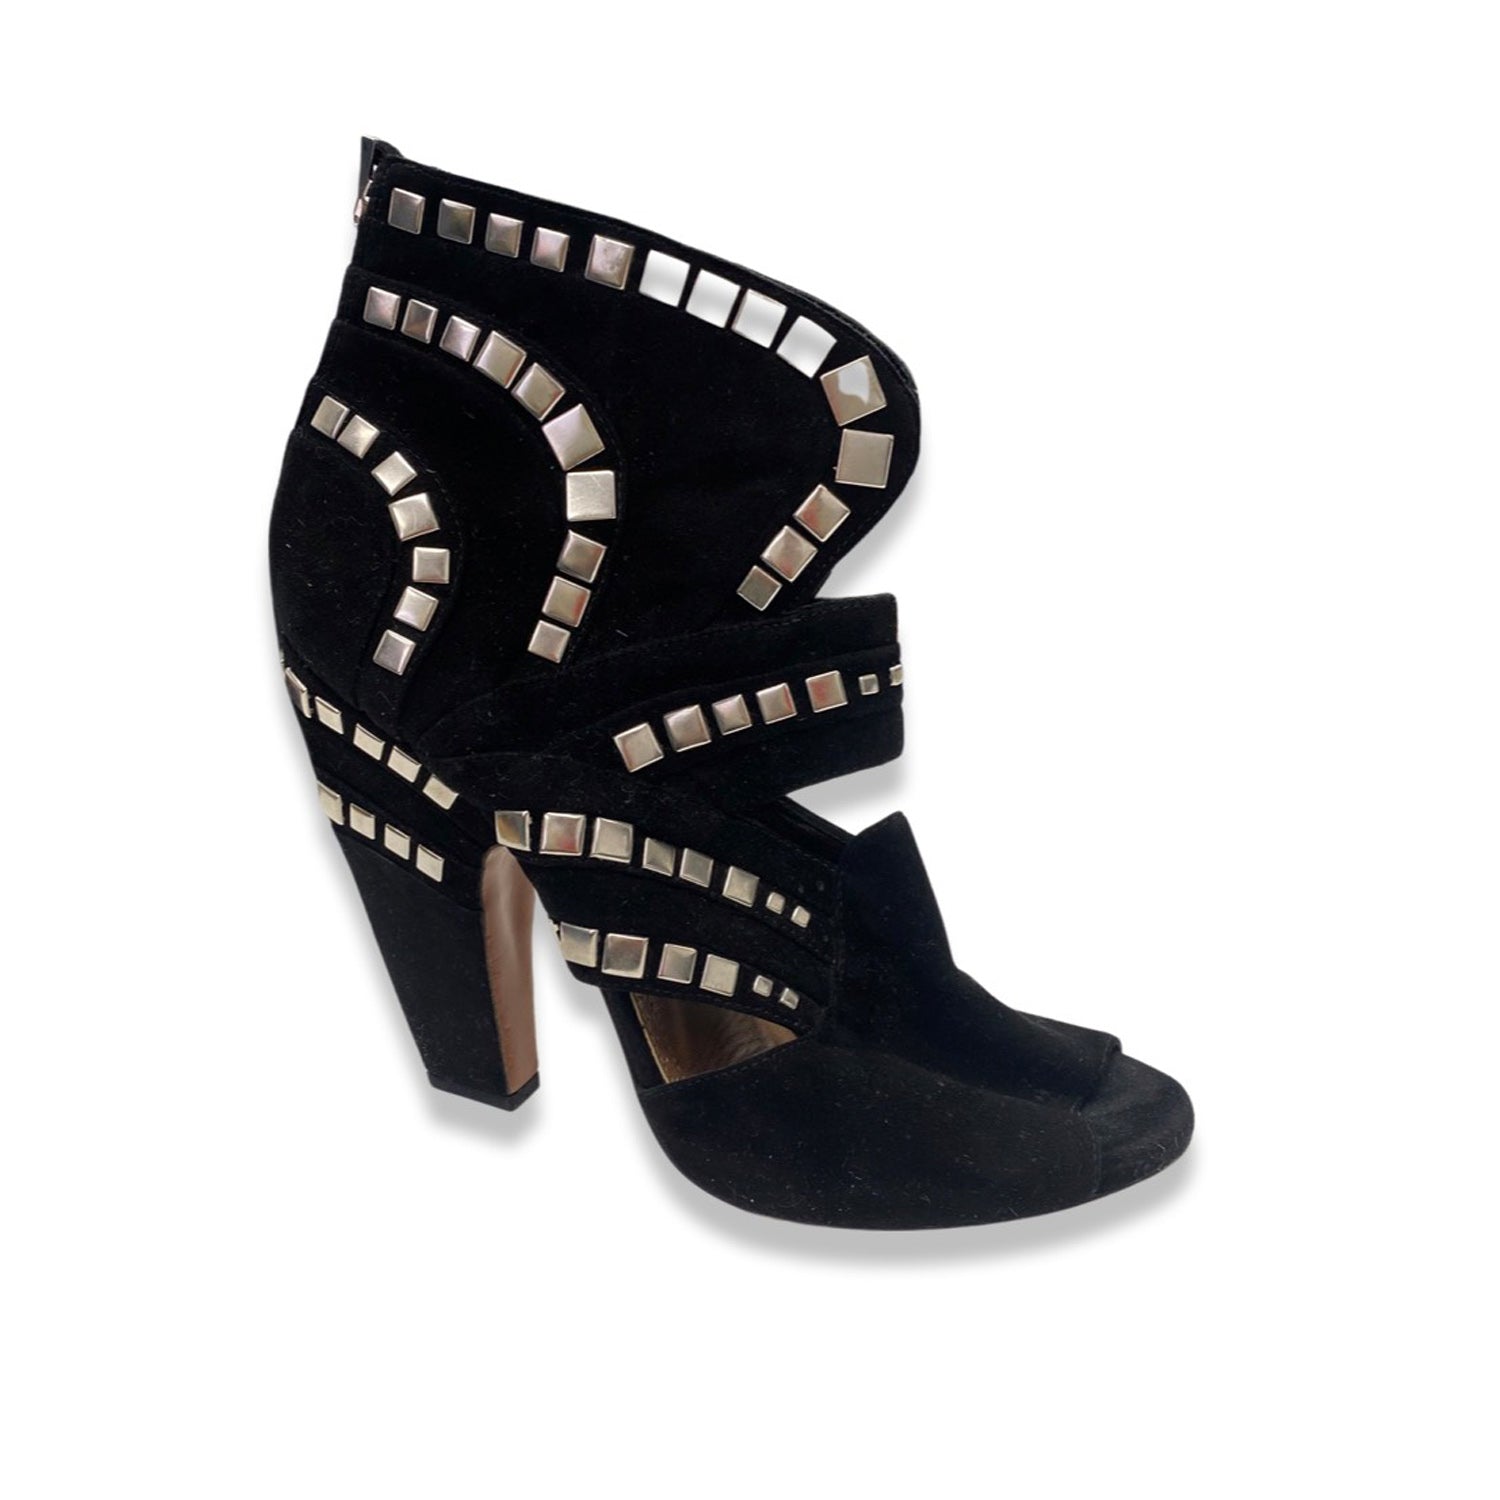 ALAÏA black and silver studded open toe heeled ankle boots | Size 